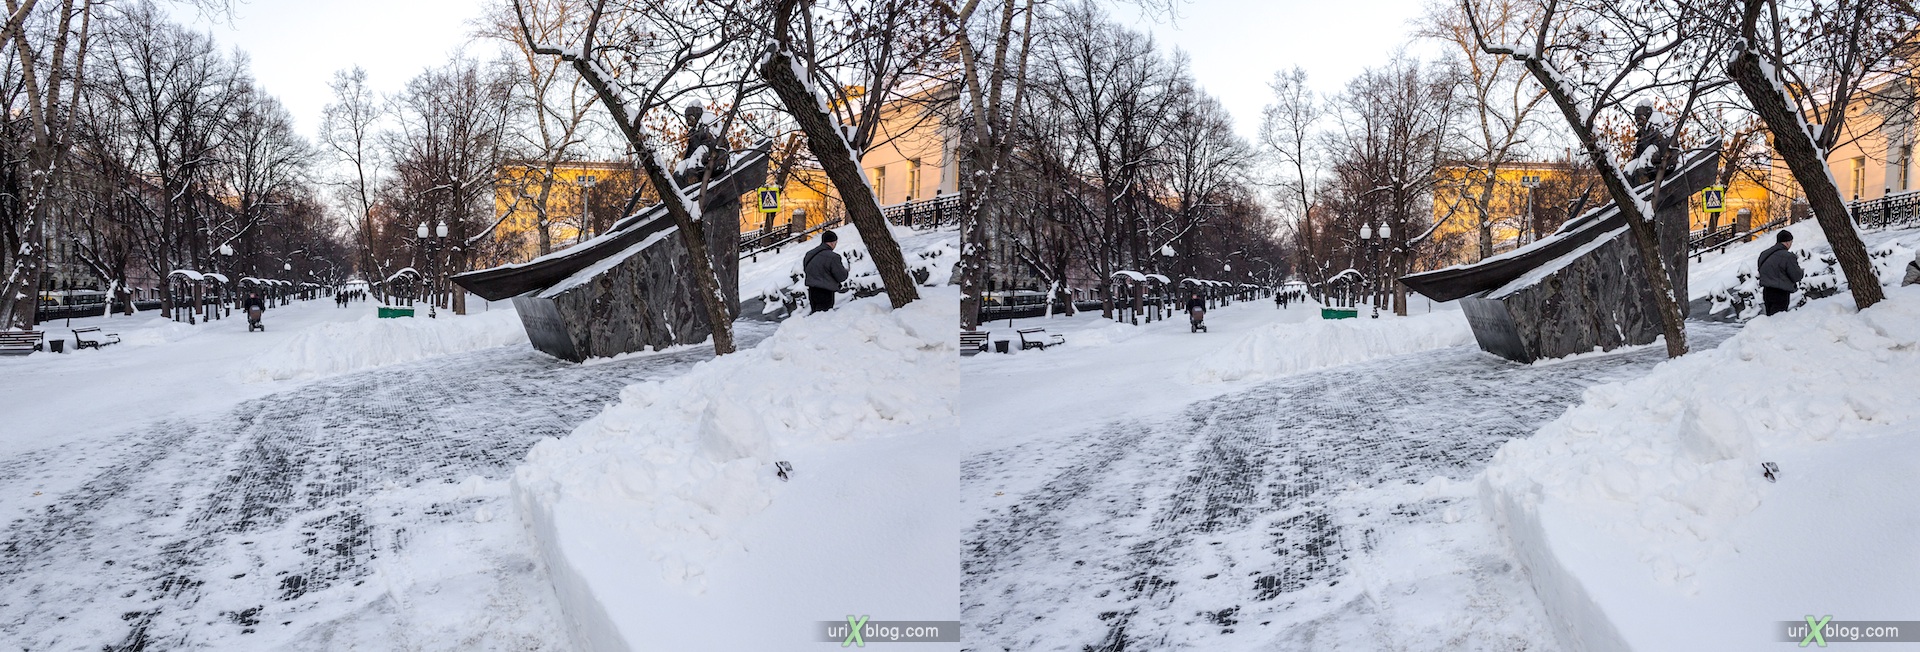 2013, Gogolevskiy Bulvar, Moscow, snow, winter, city, Russia, 3D, stereo pair, cross-eyed, crossview, cross view stereo pair